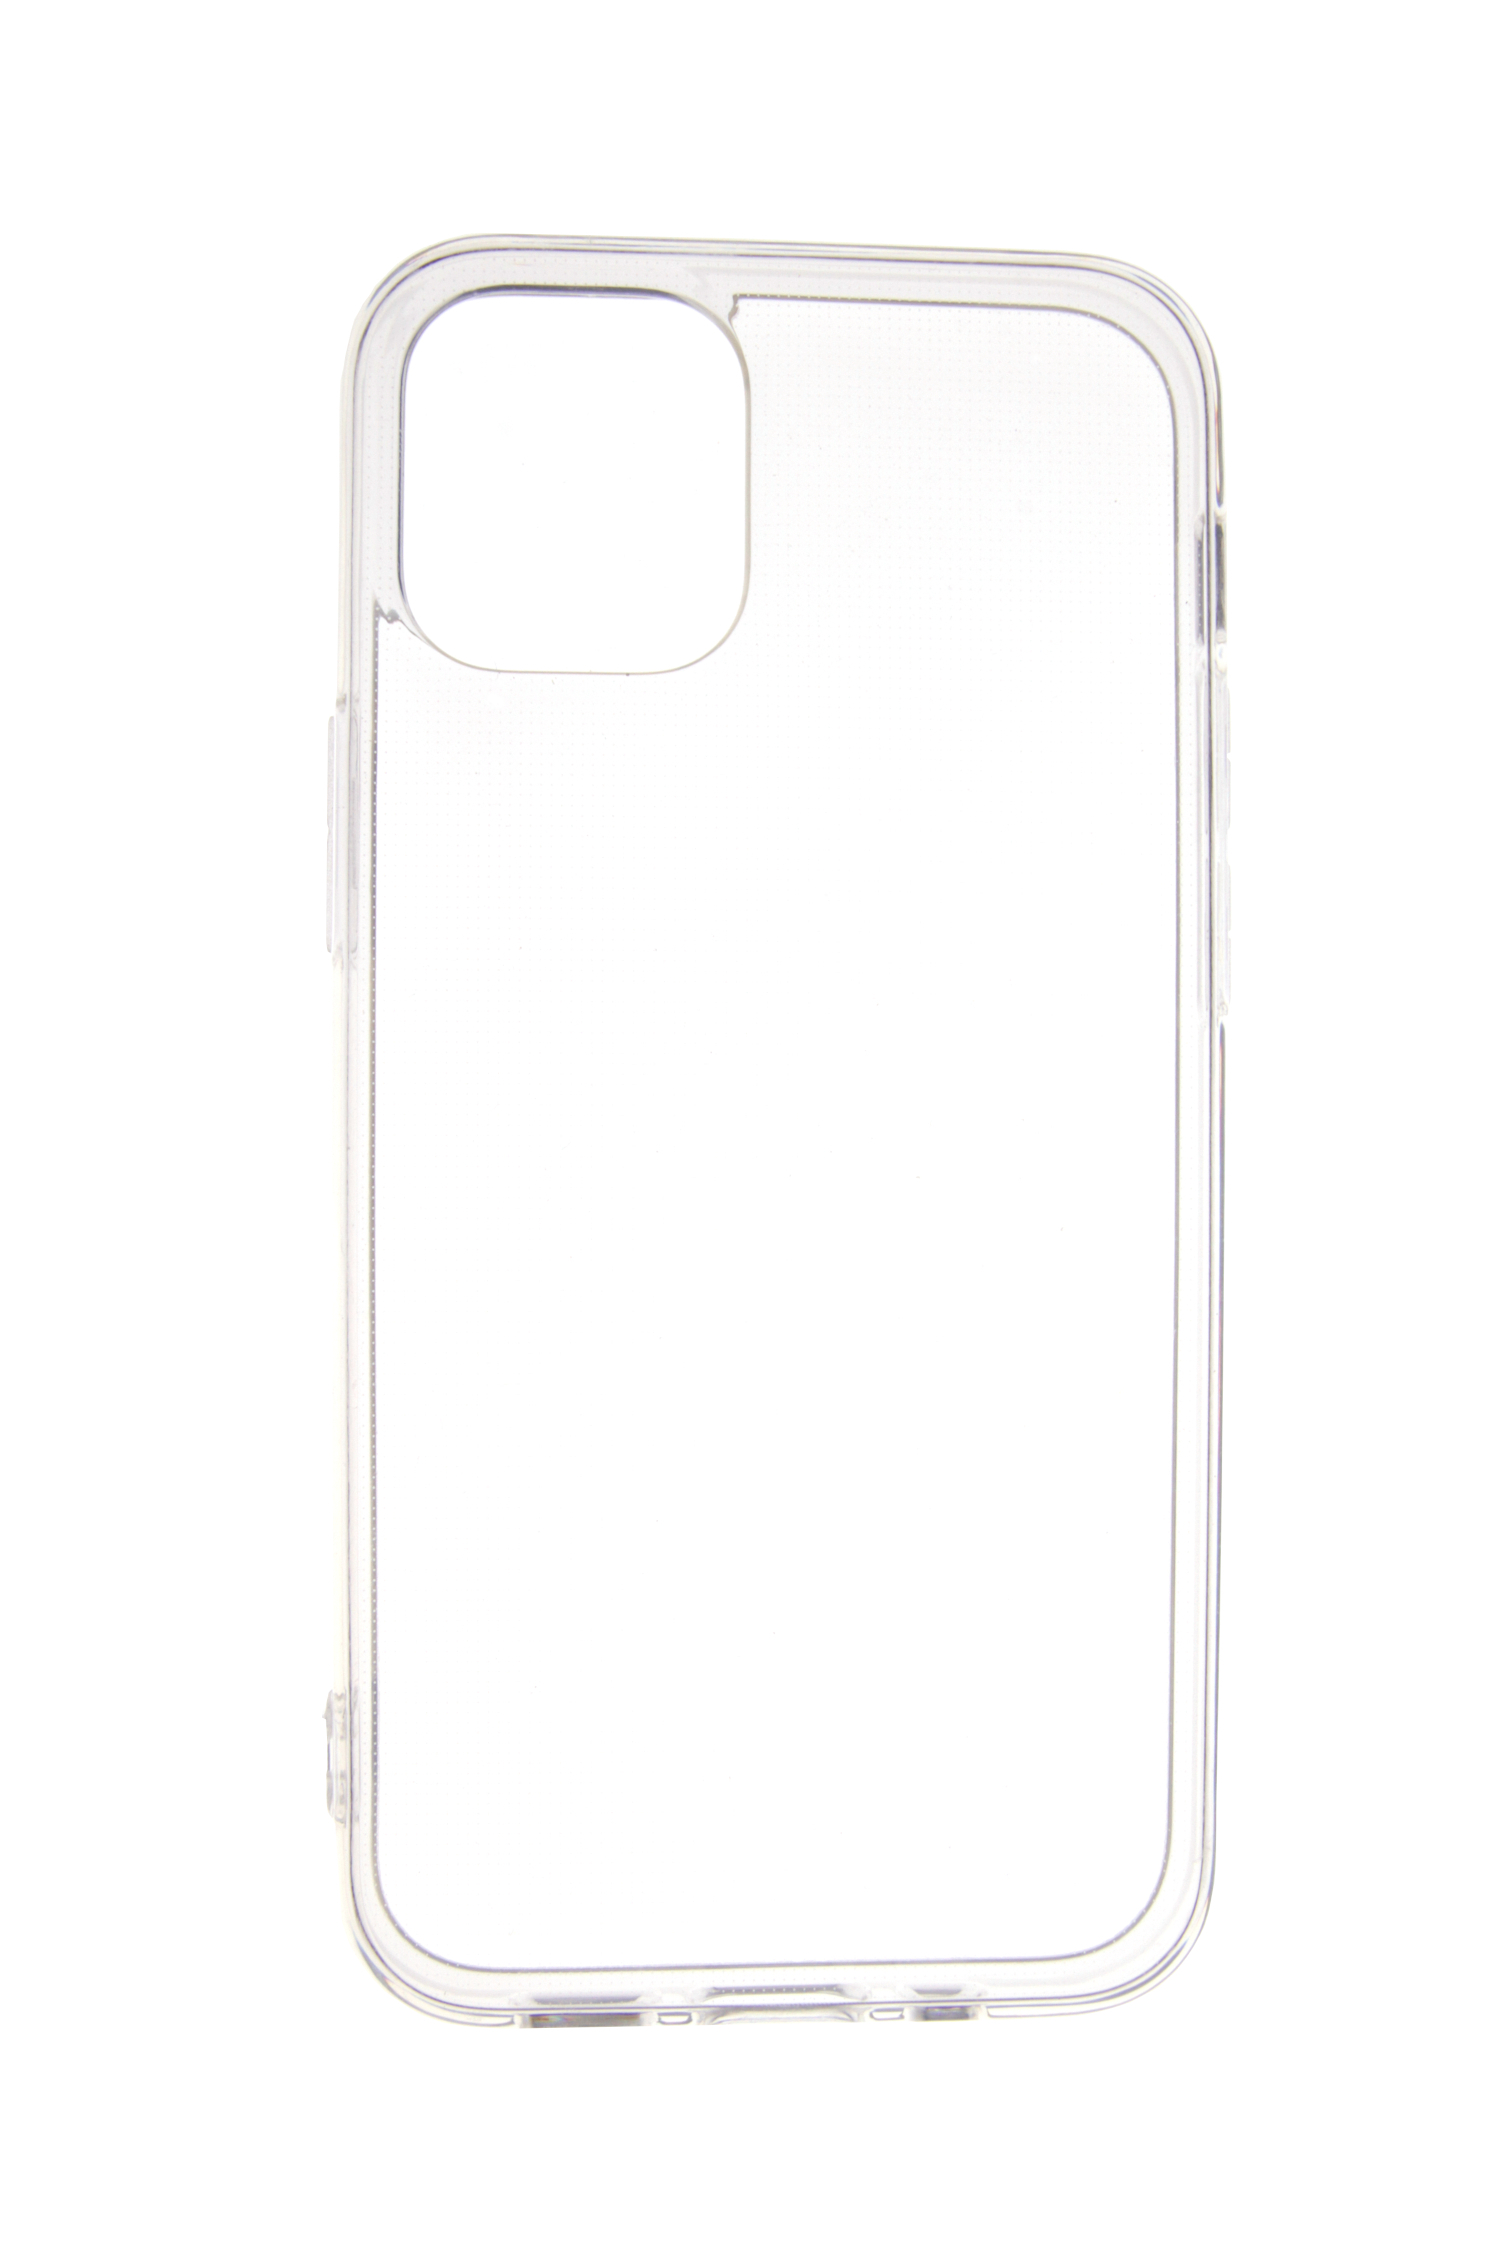 TPU 12 Case, Pro, / JAMCOVER mm iPhone 1.8 Transparent 12 iPhone Apple, Backcover,